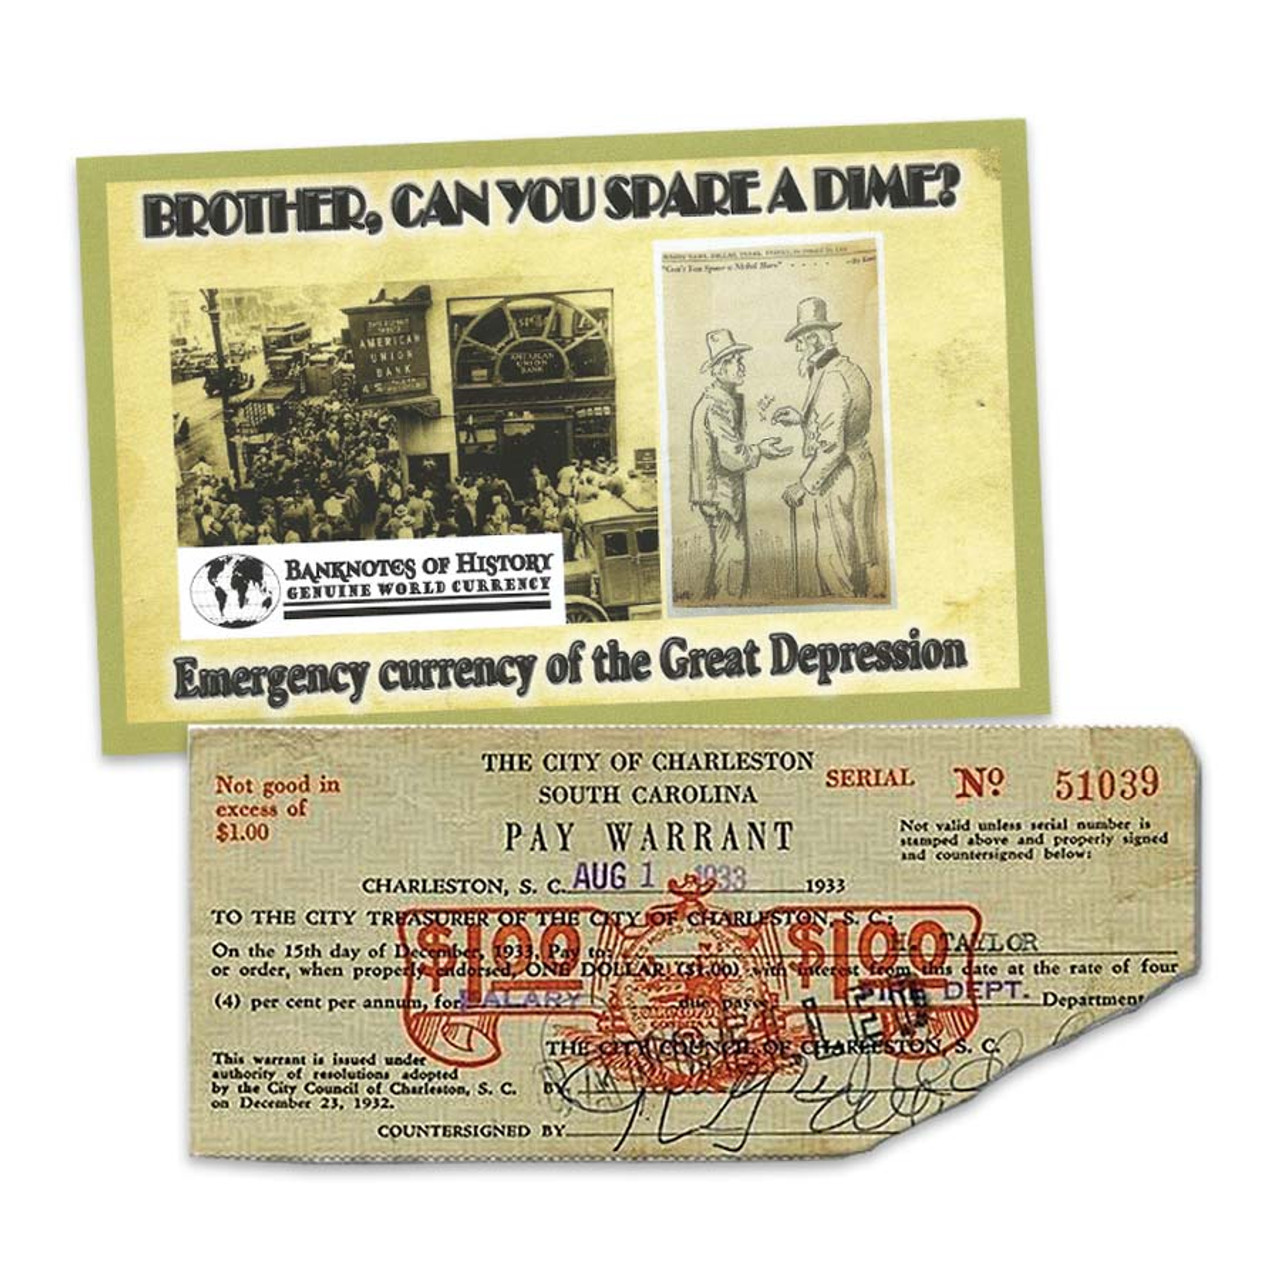 Great Depression Emergency Currency $1 Pay Warrant